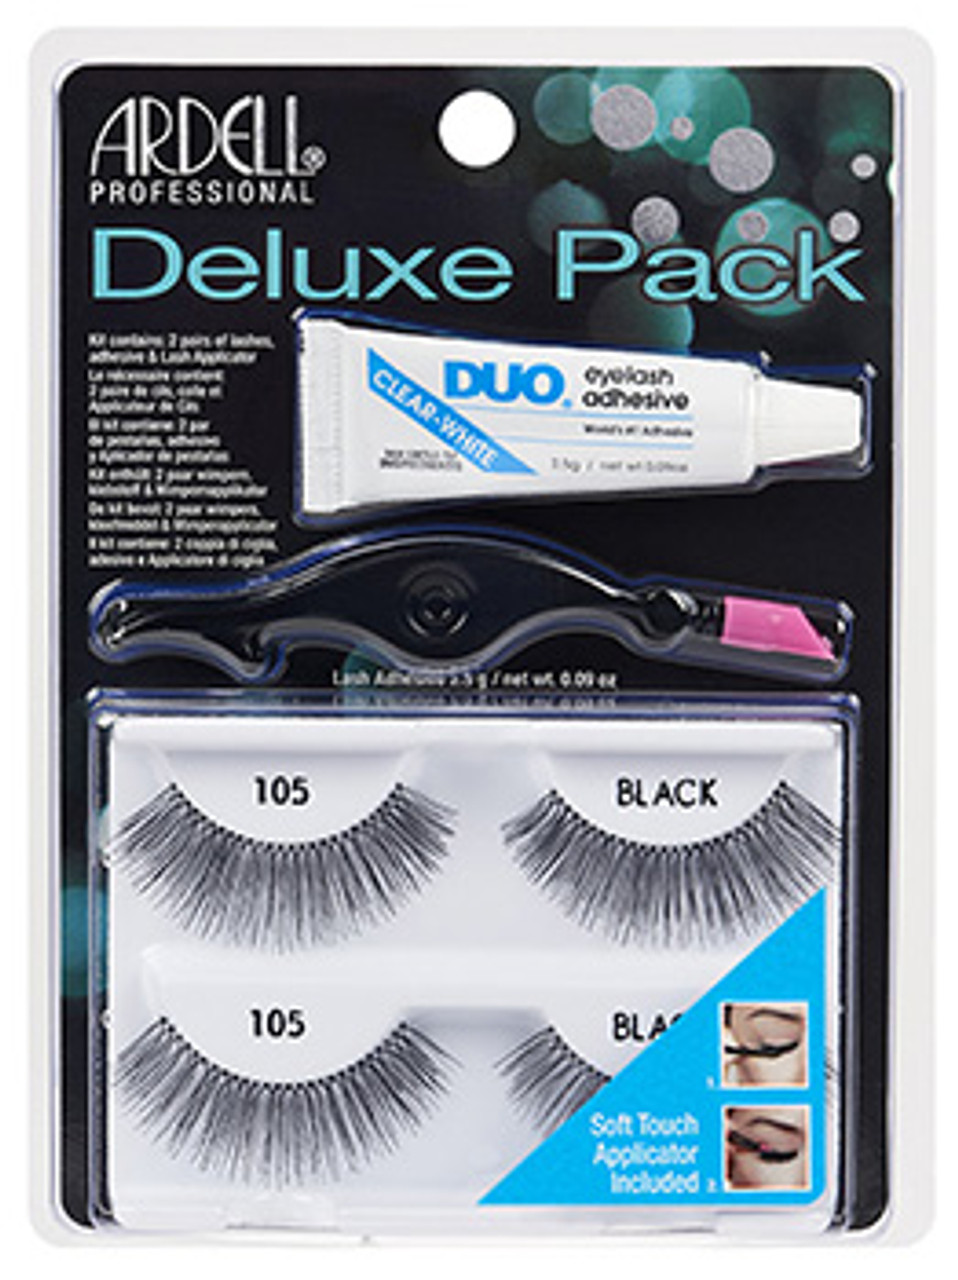 Ardell Deluxe Pack - 105 Black